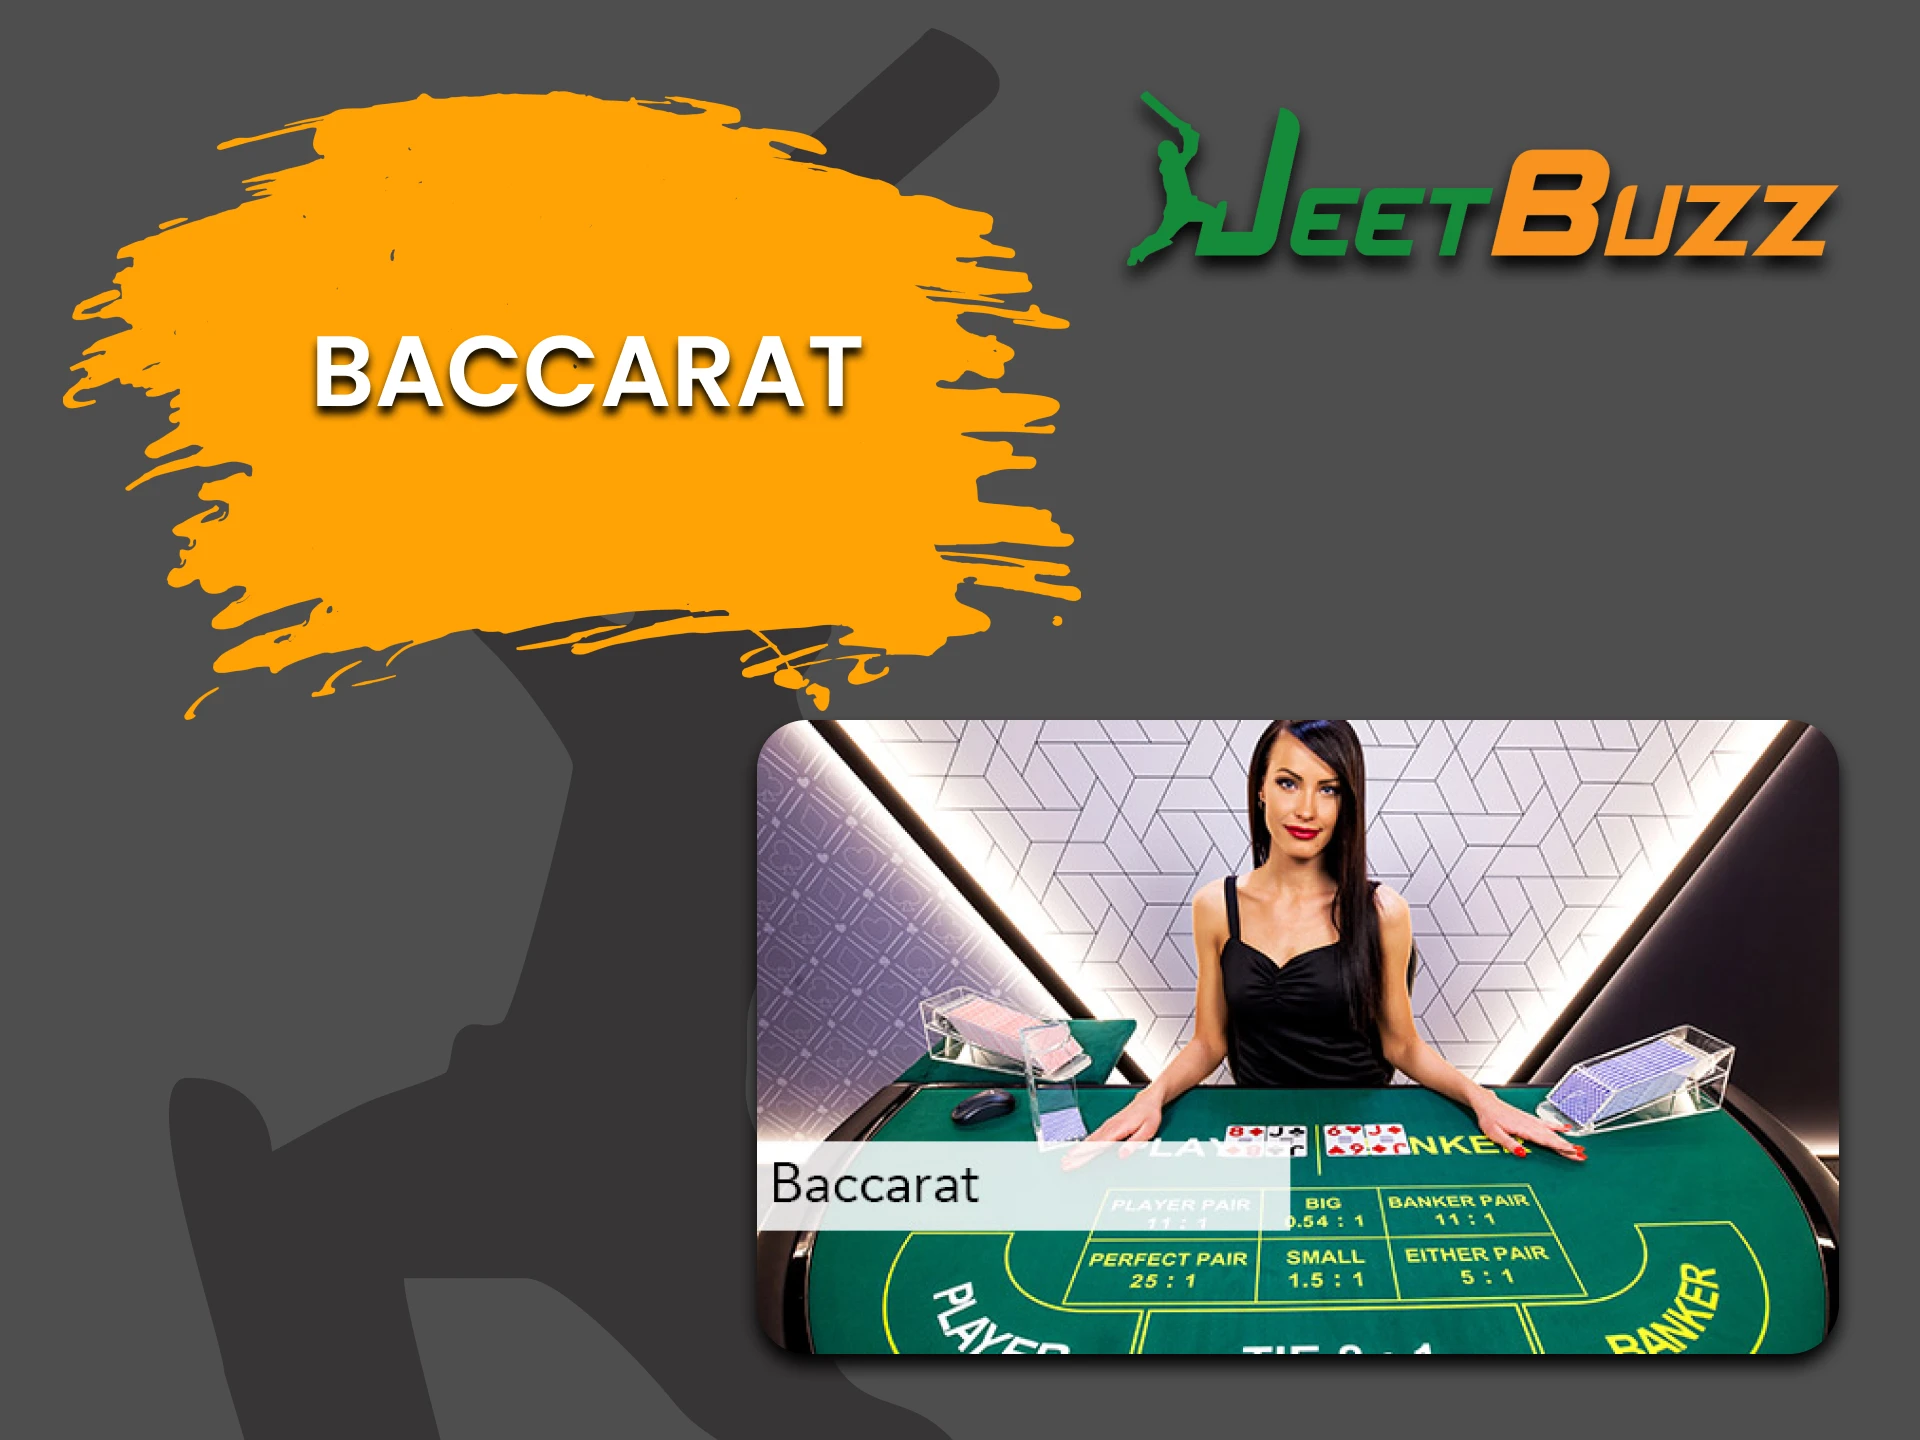 To play live casino on JettBuzz, choose Baccarat.